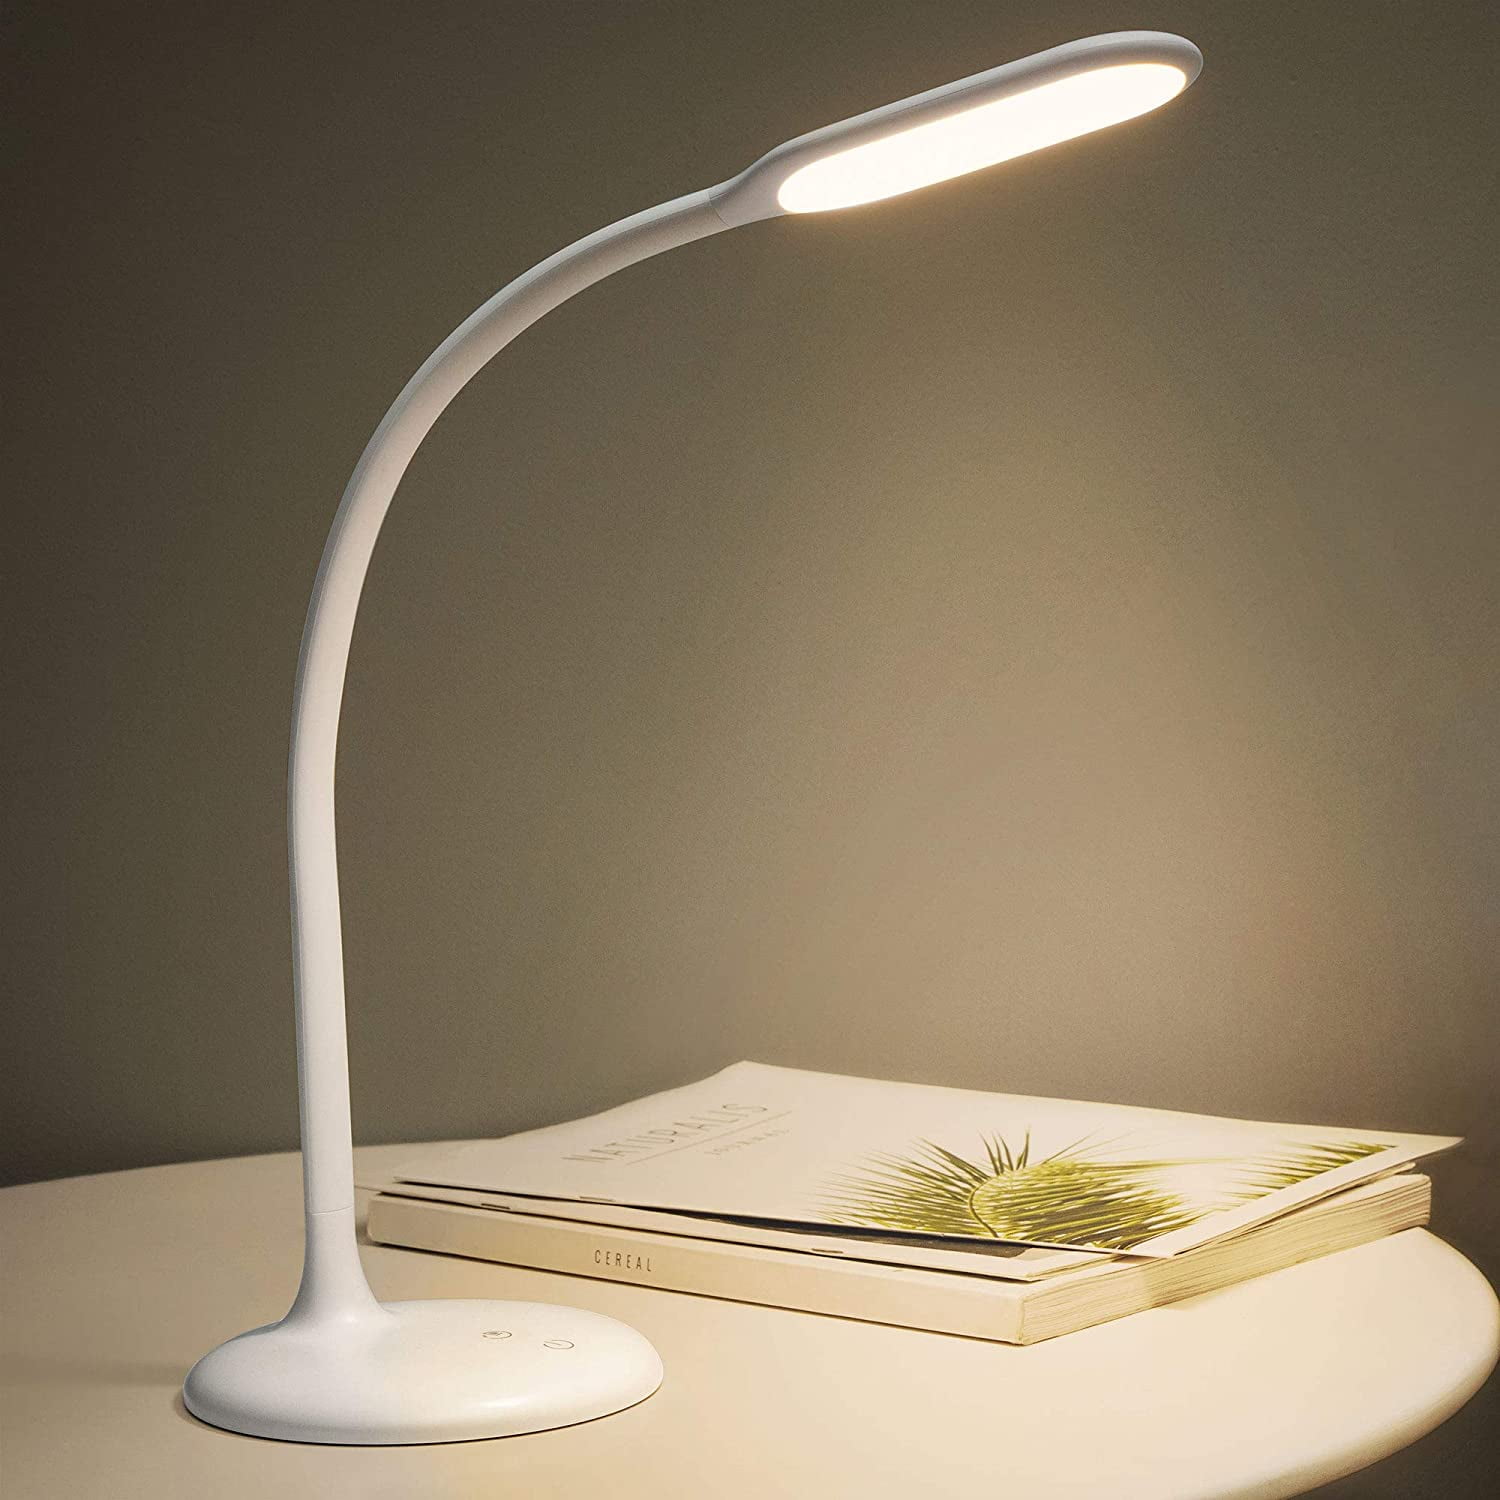 Cordless Lamp Gladle LED Desk Lamp, Battery Operated Table Lamps